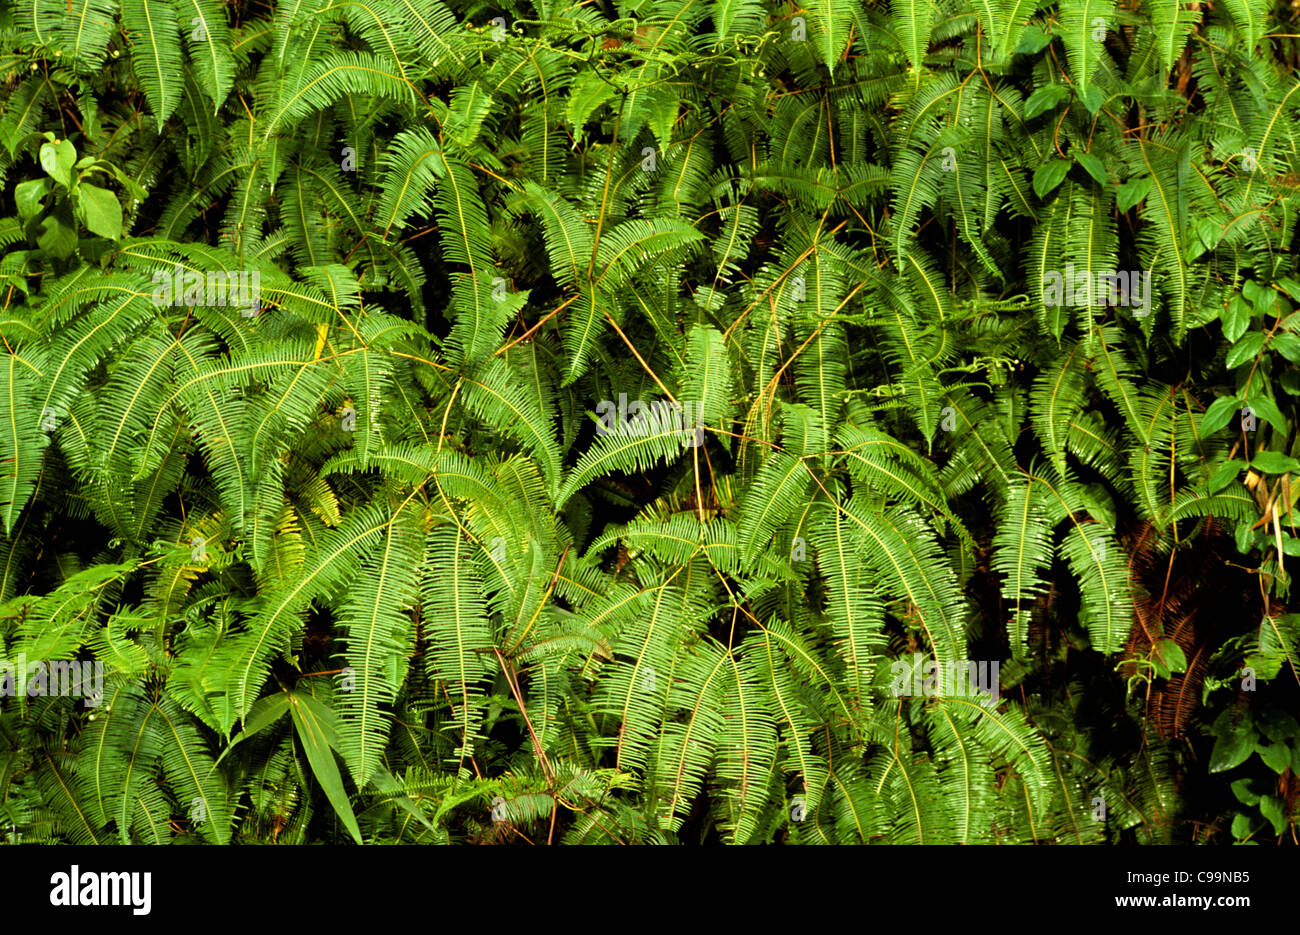 Old world forked fern (Dicranopteris linearis) Malaysia Stock Photo